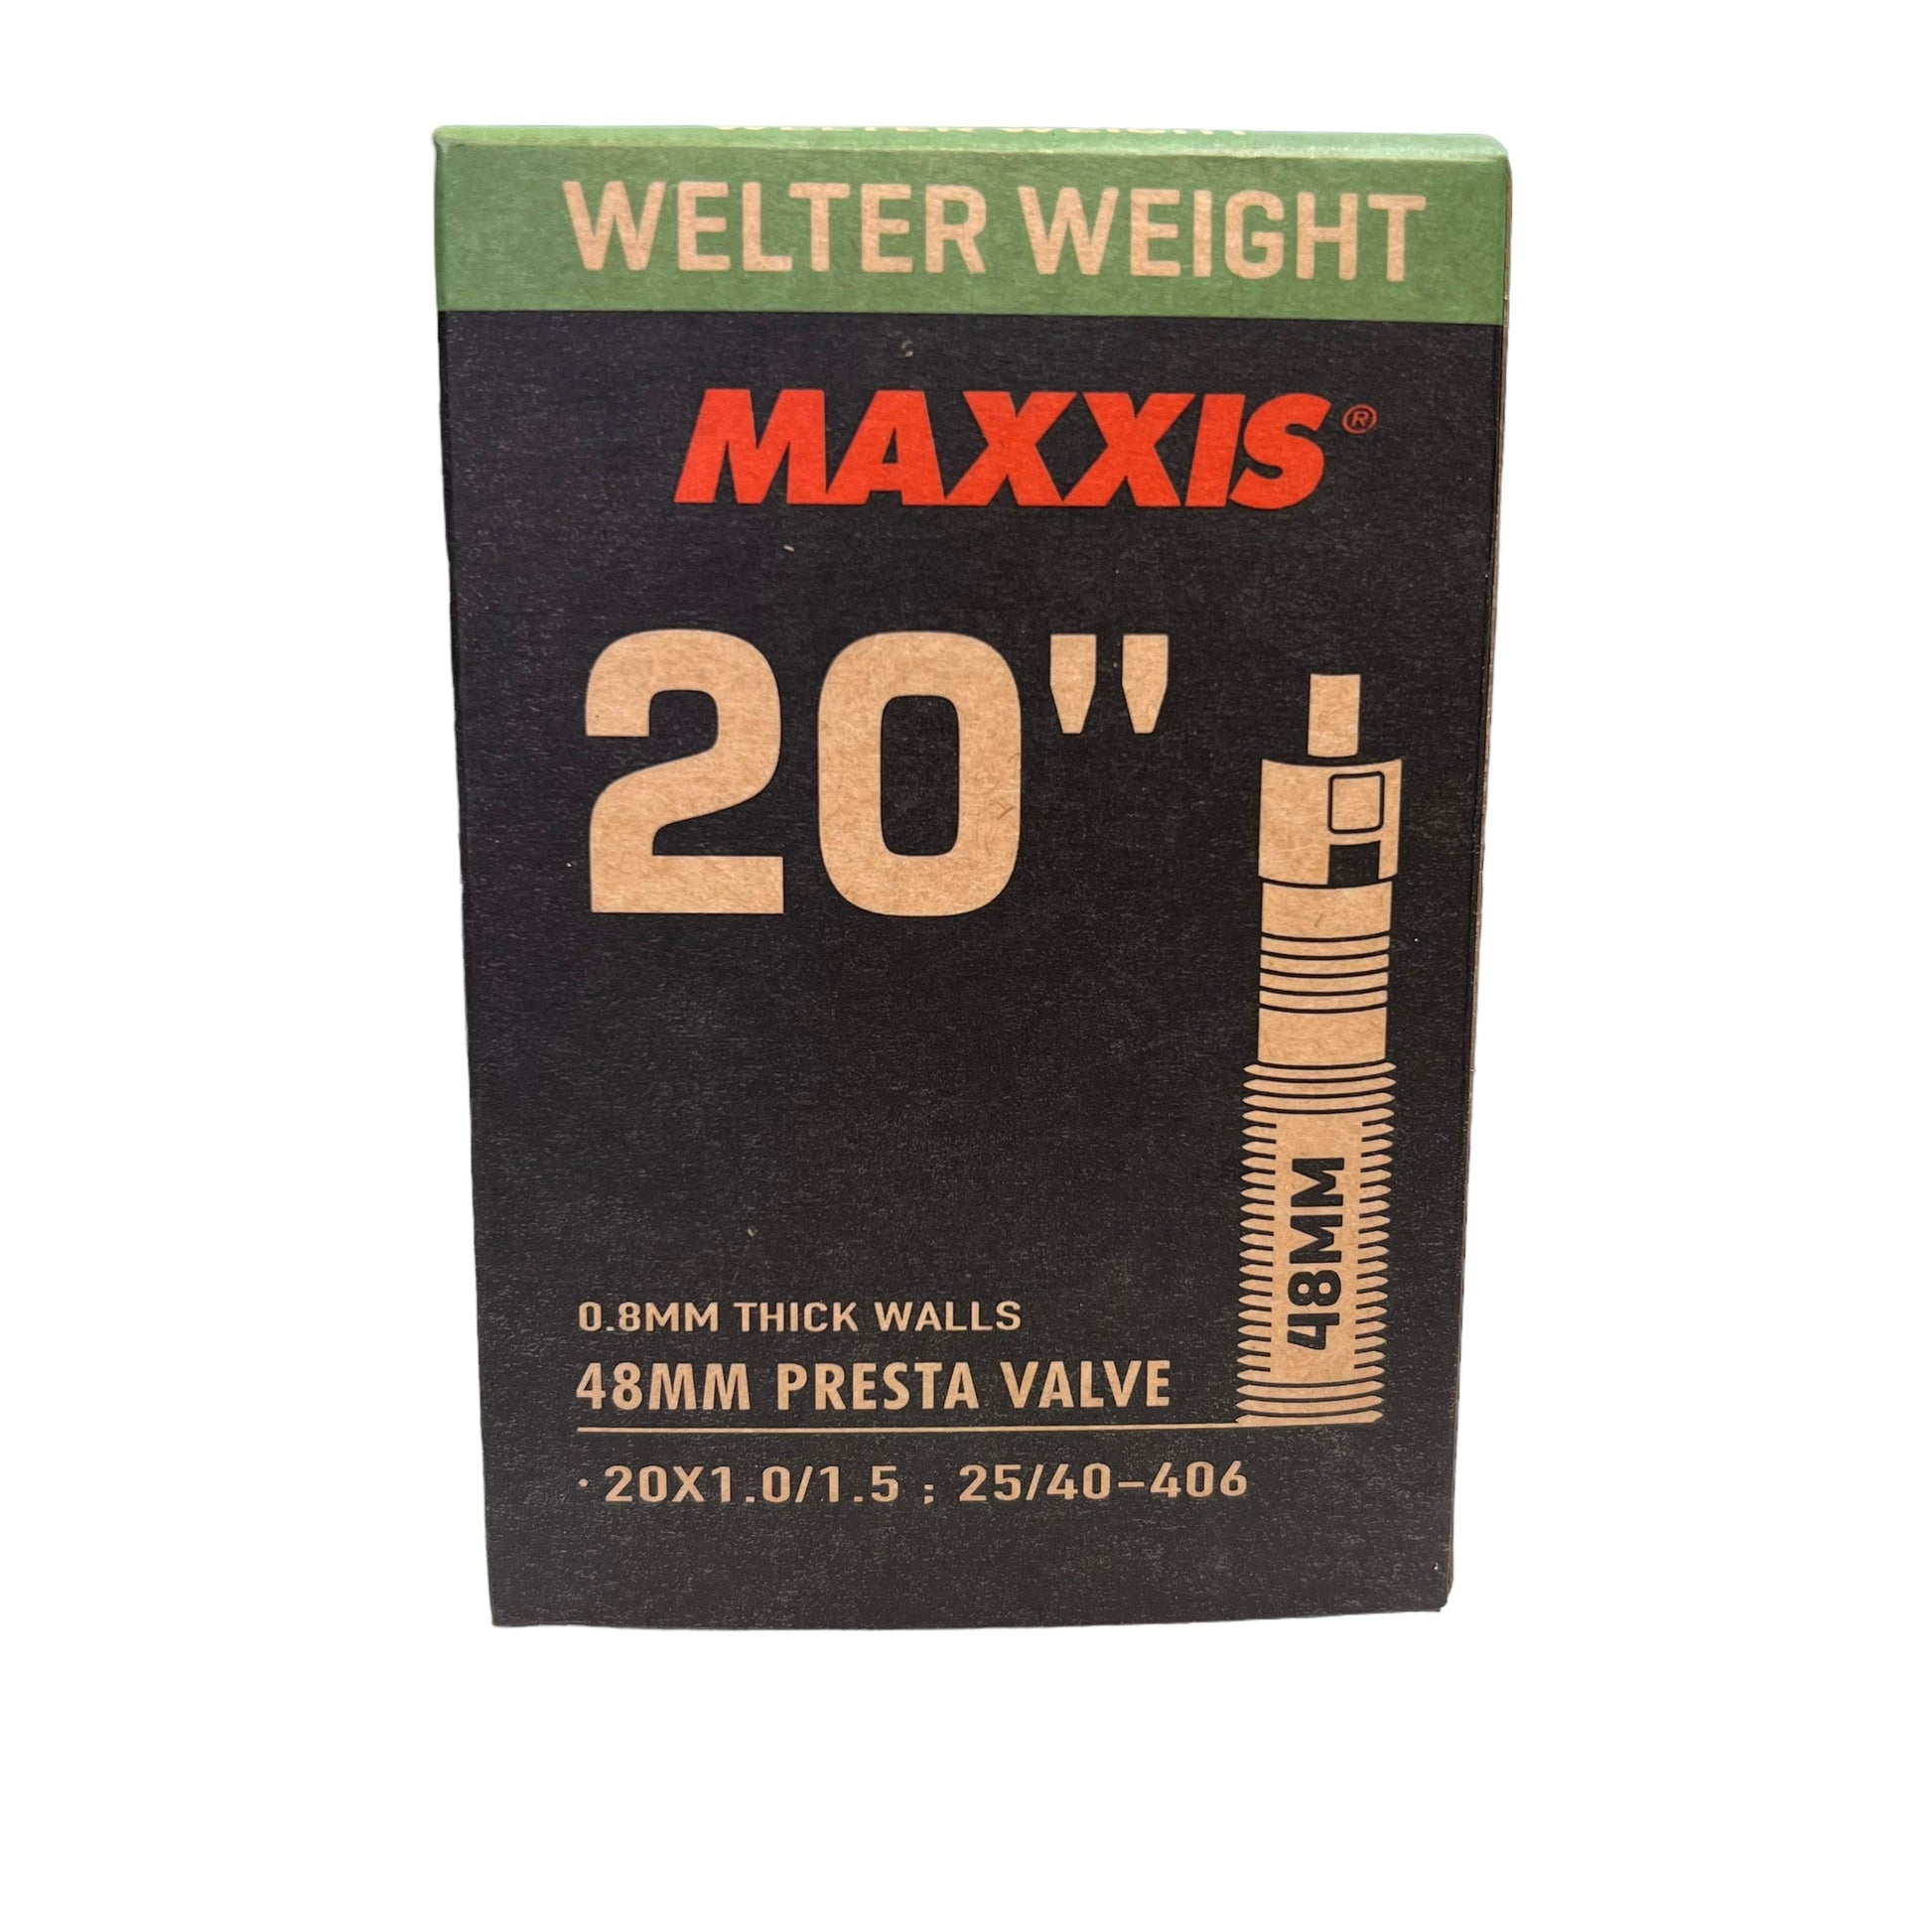 MAXXIS Welterweight Tube 20 x 1.0-1.5 PV48 | PRESTA